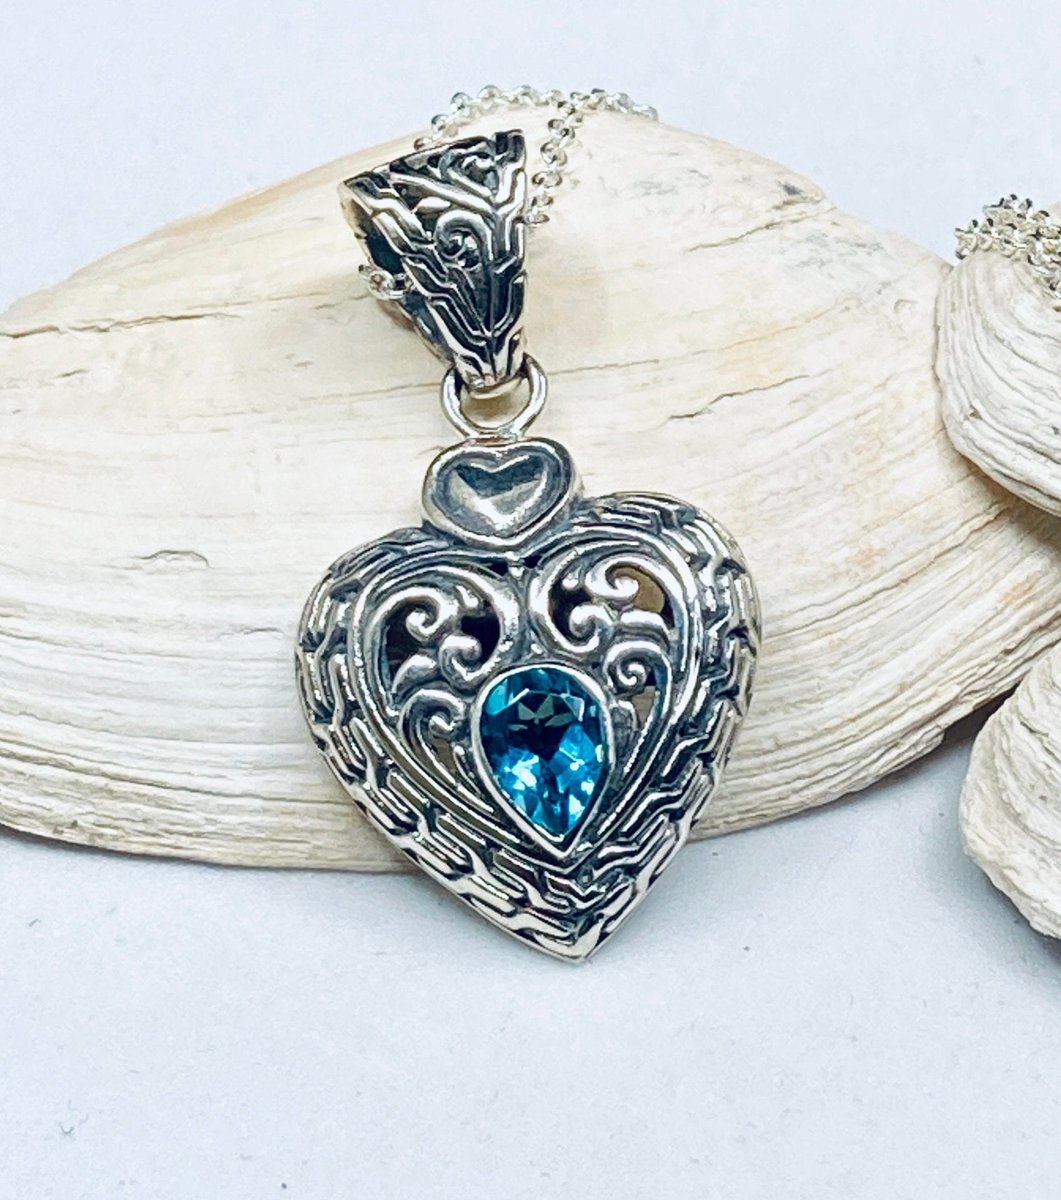 Life is too short to wear boring jewelry!
etsy.me/3kGLFvG

#HeartPendant #HeartJewelry